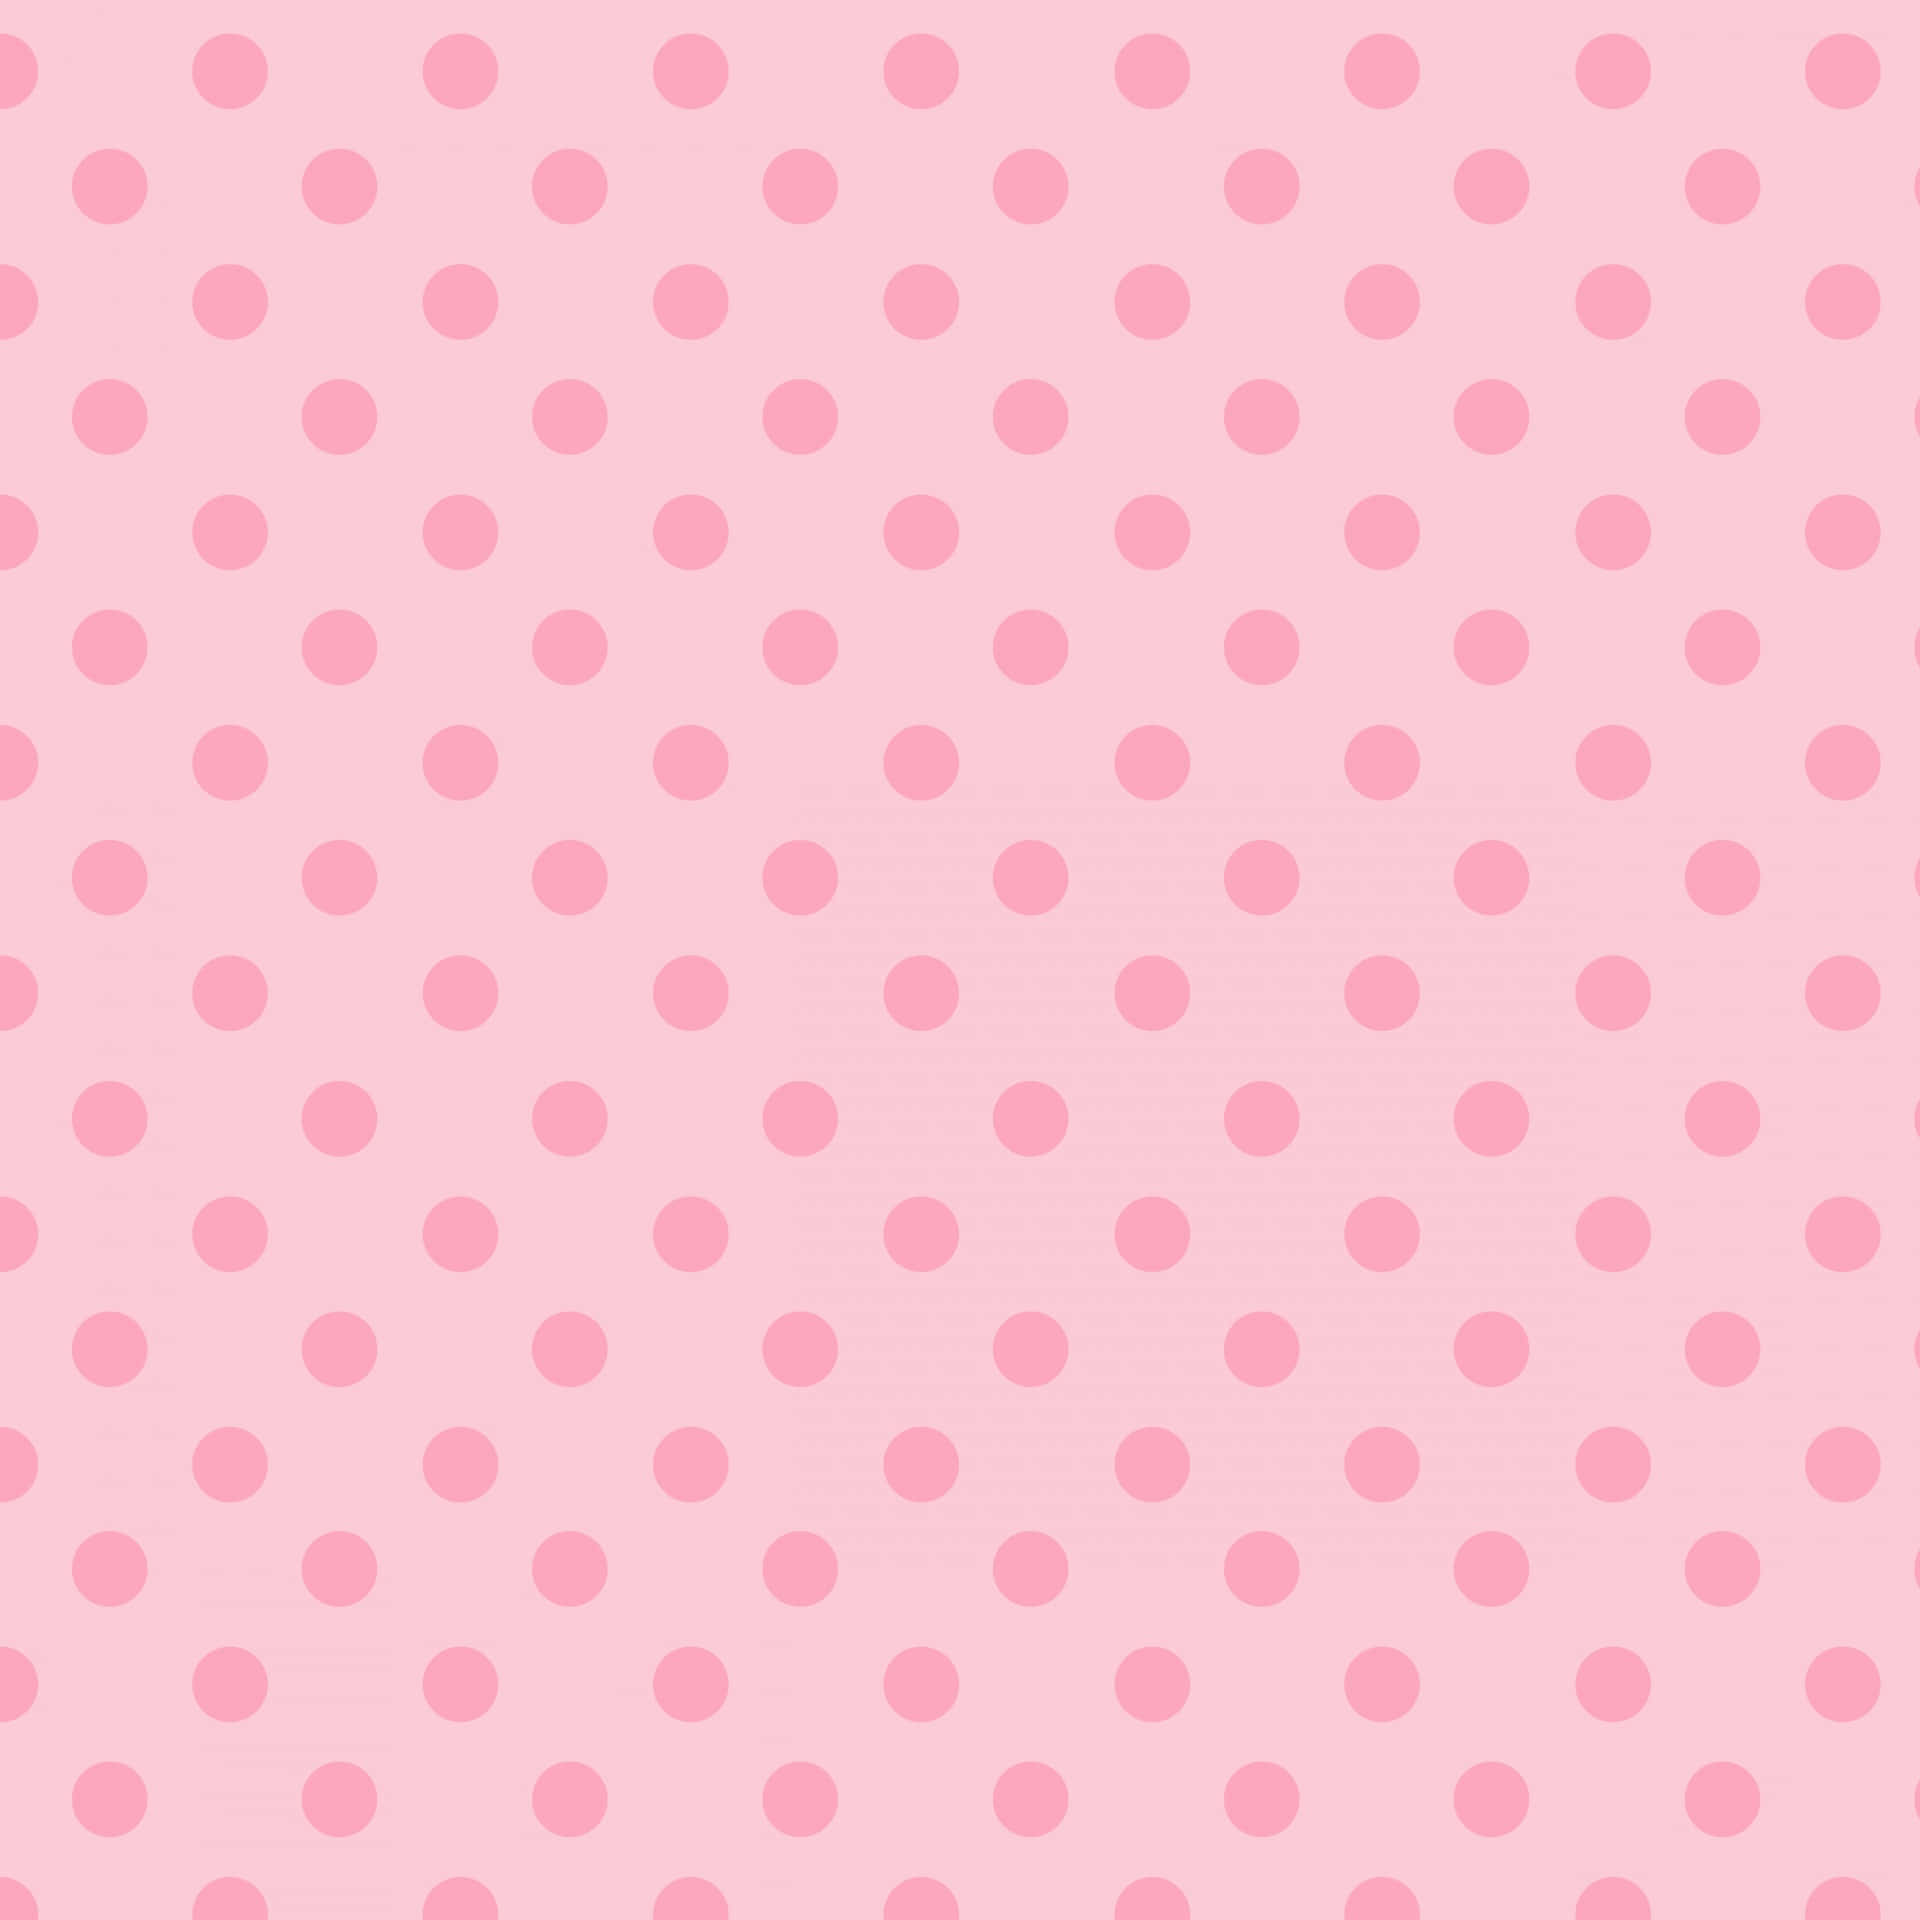 A background of classic pink and white polka dot pattern Wallpaper